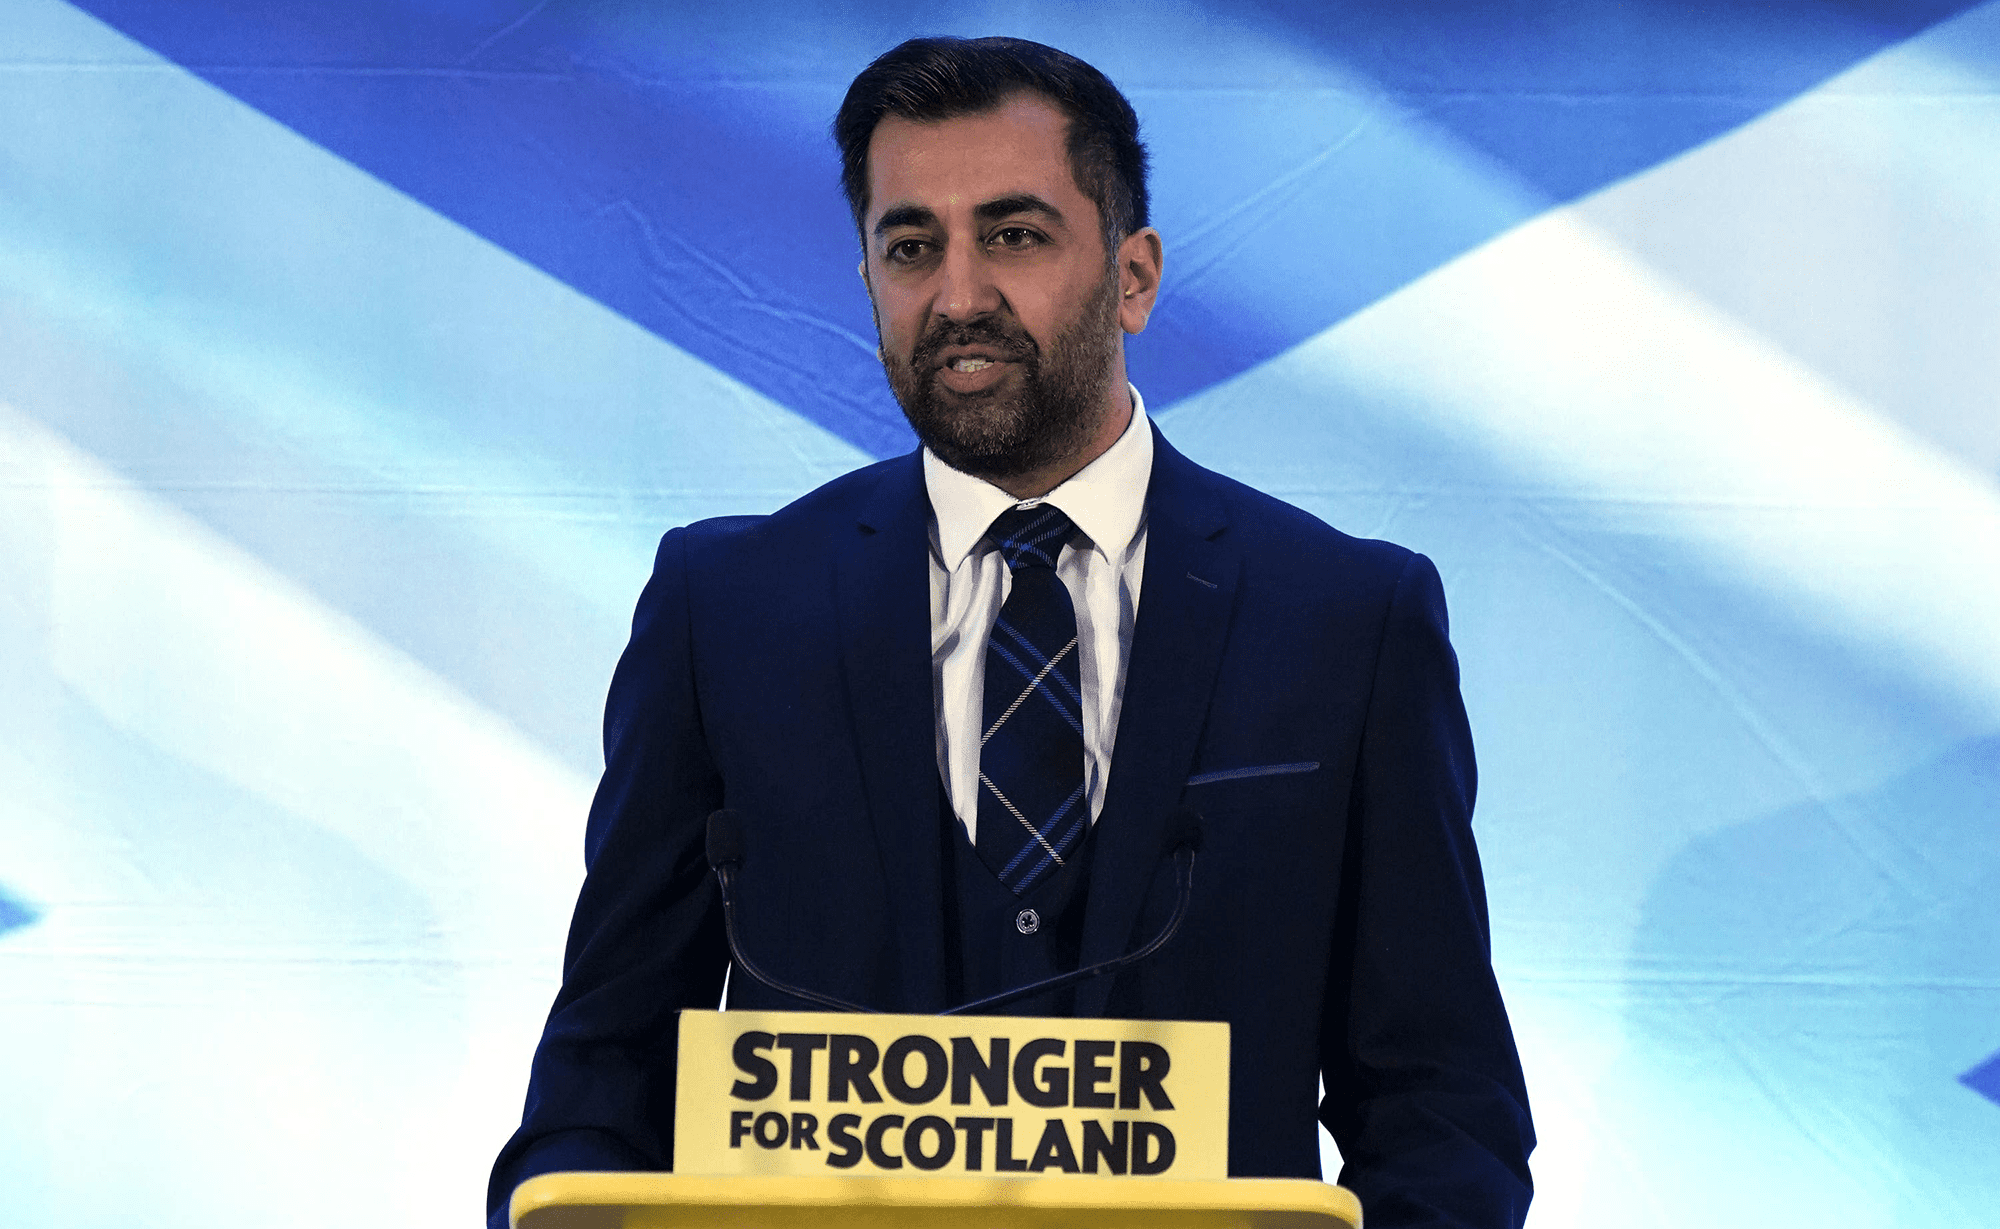 Investigation into SNP not the reason for Sturgeon’s resignation, says Yousaf